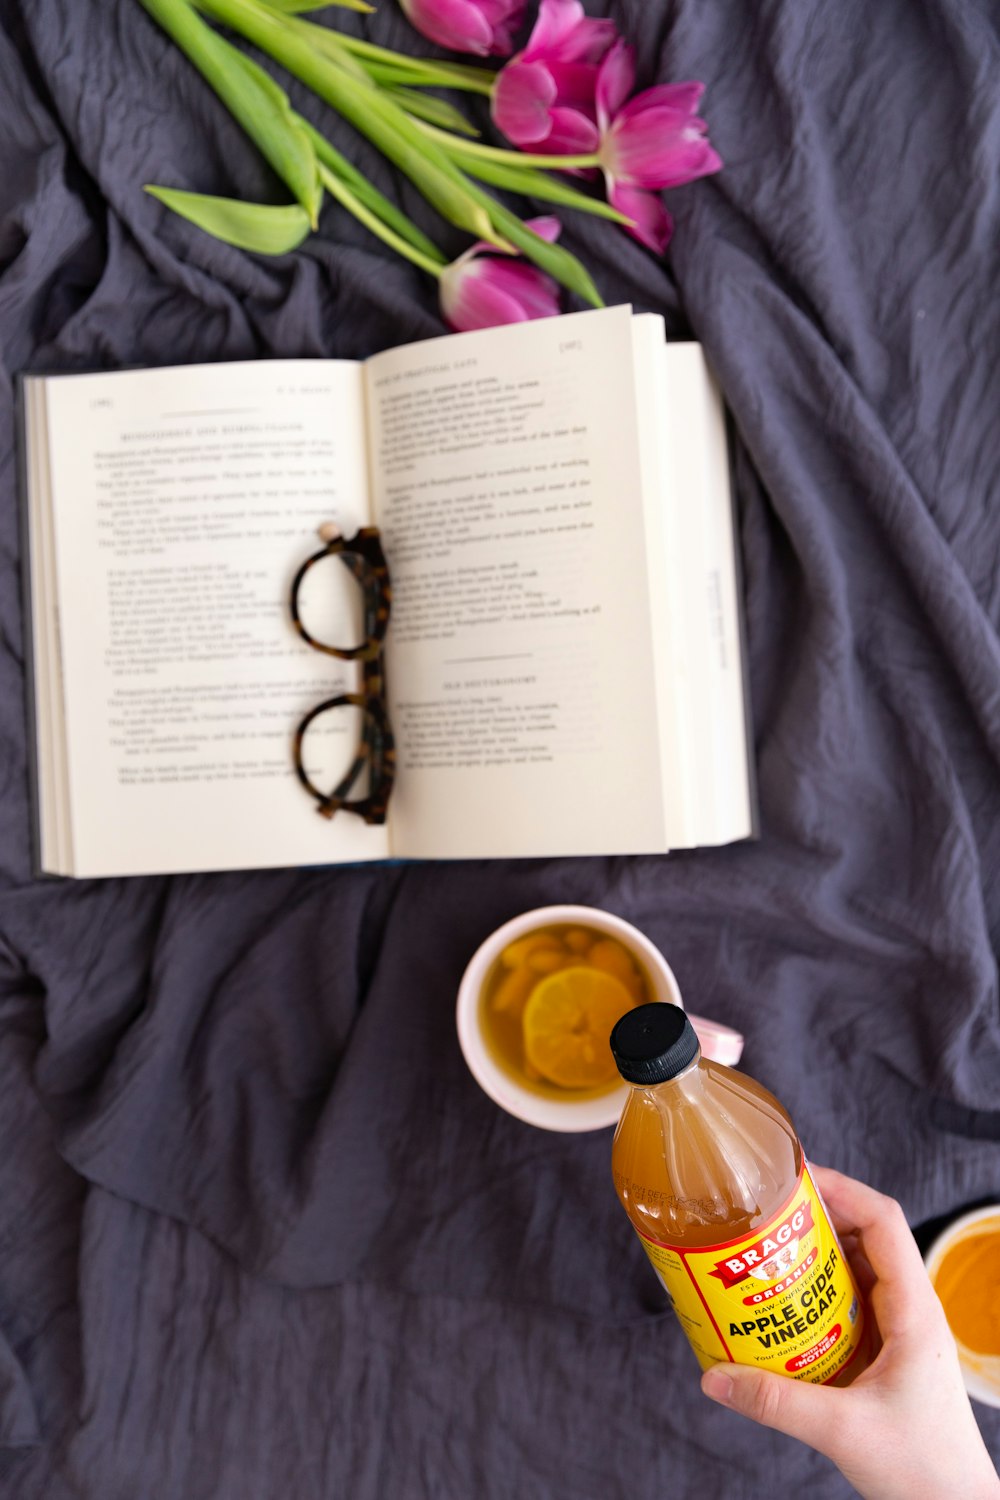 a person holding a bottle of mustard next to a book